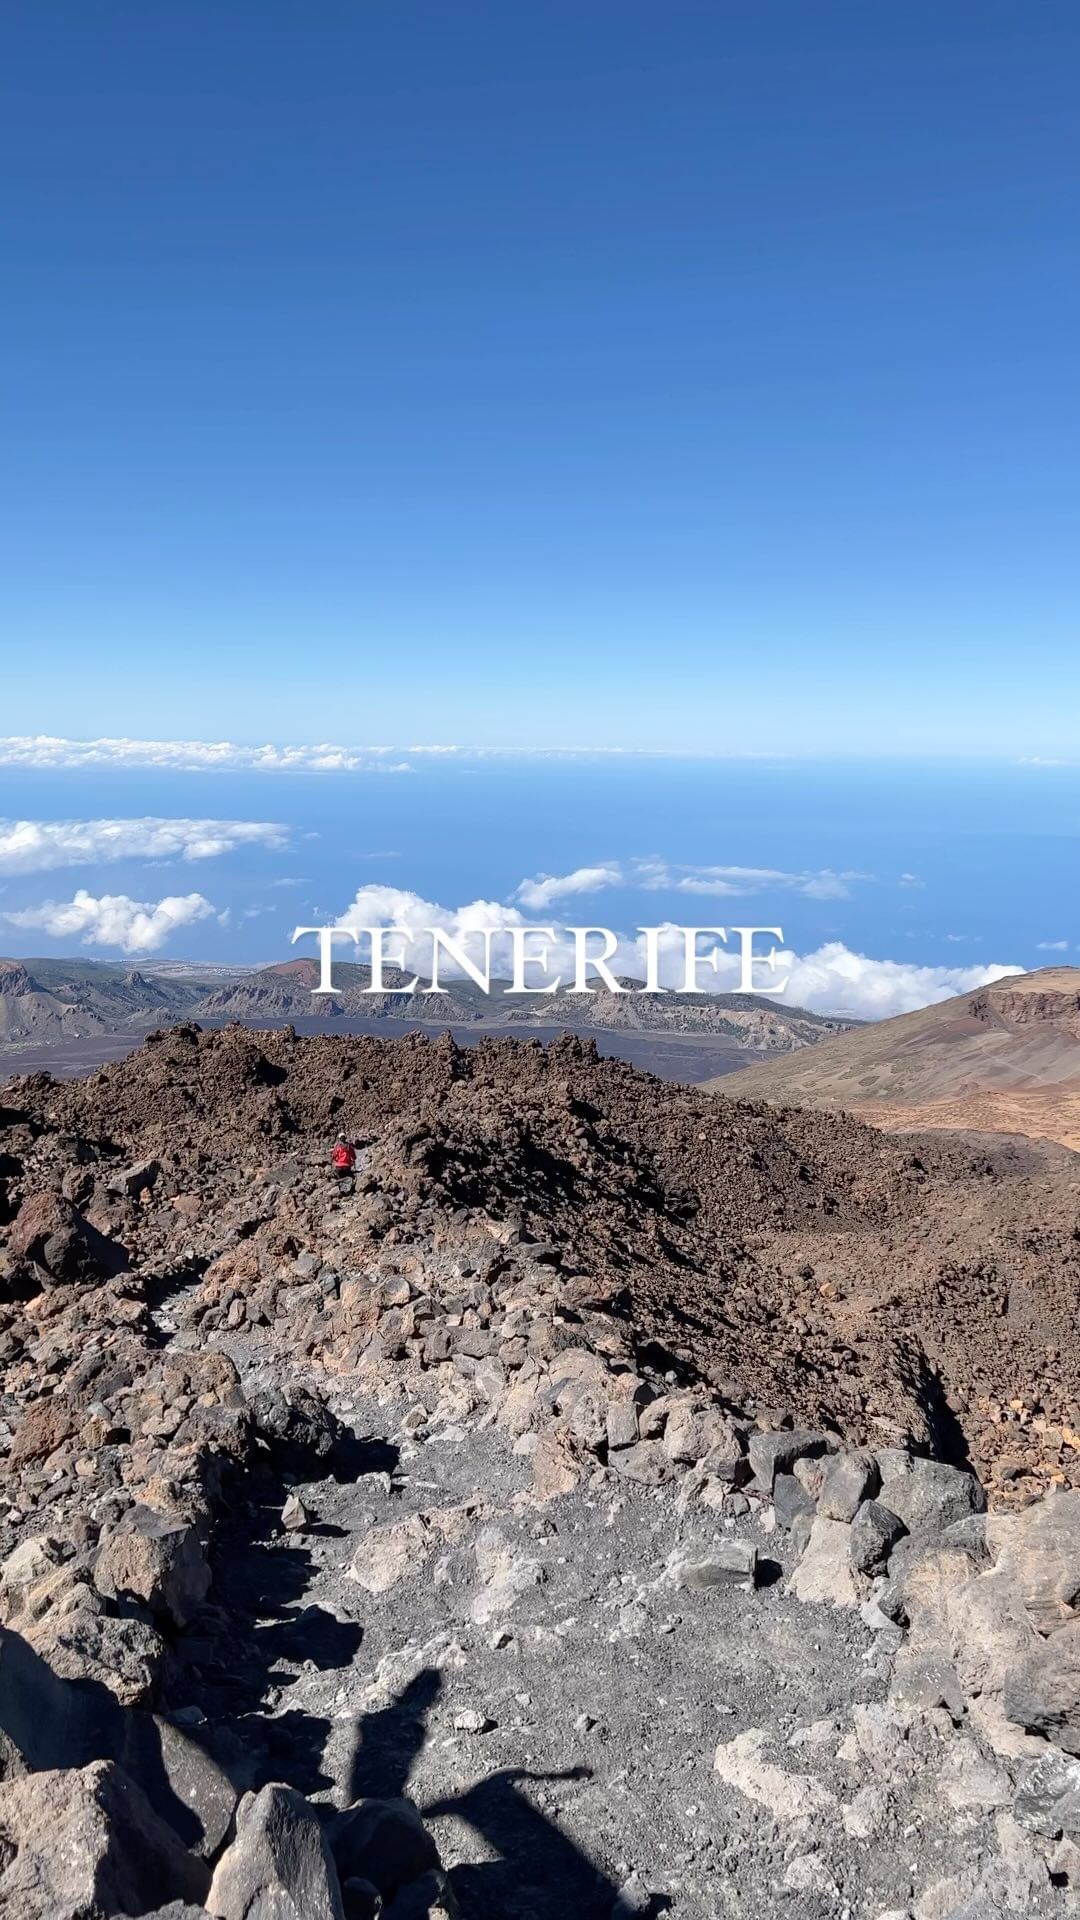 5 Days of Beaches and Volcanoes in Tenerife